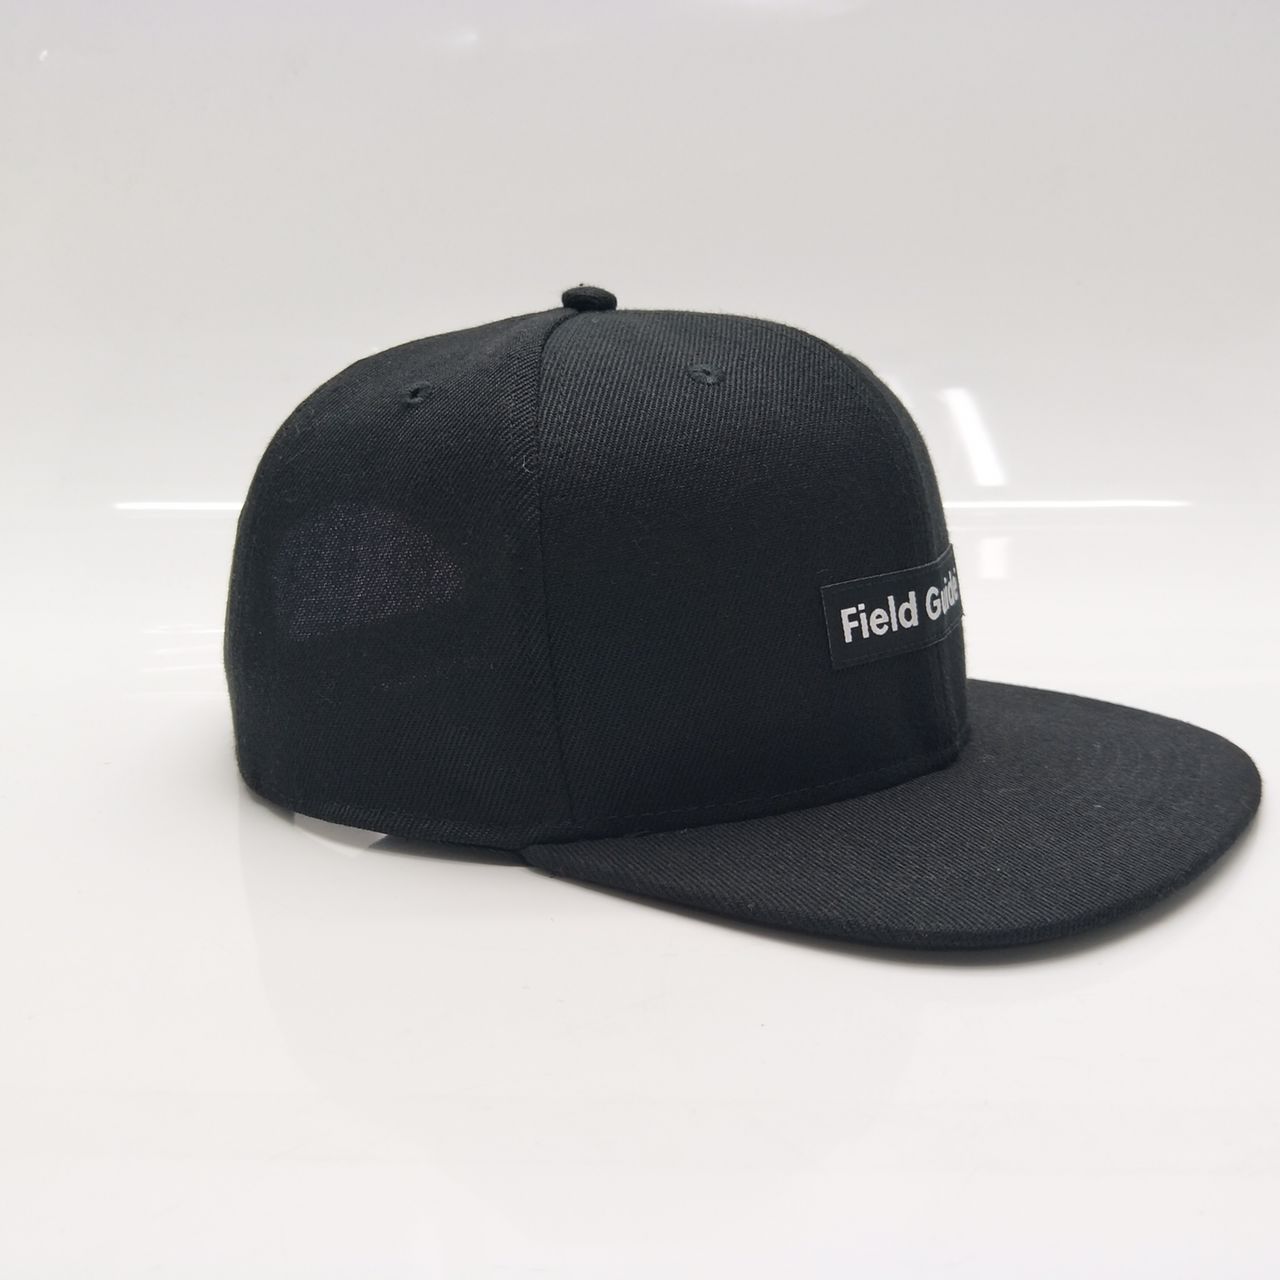 Black Field Guide Snap Back Patch Hat